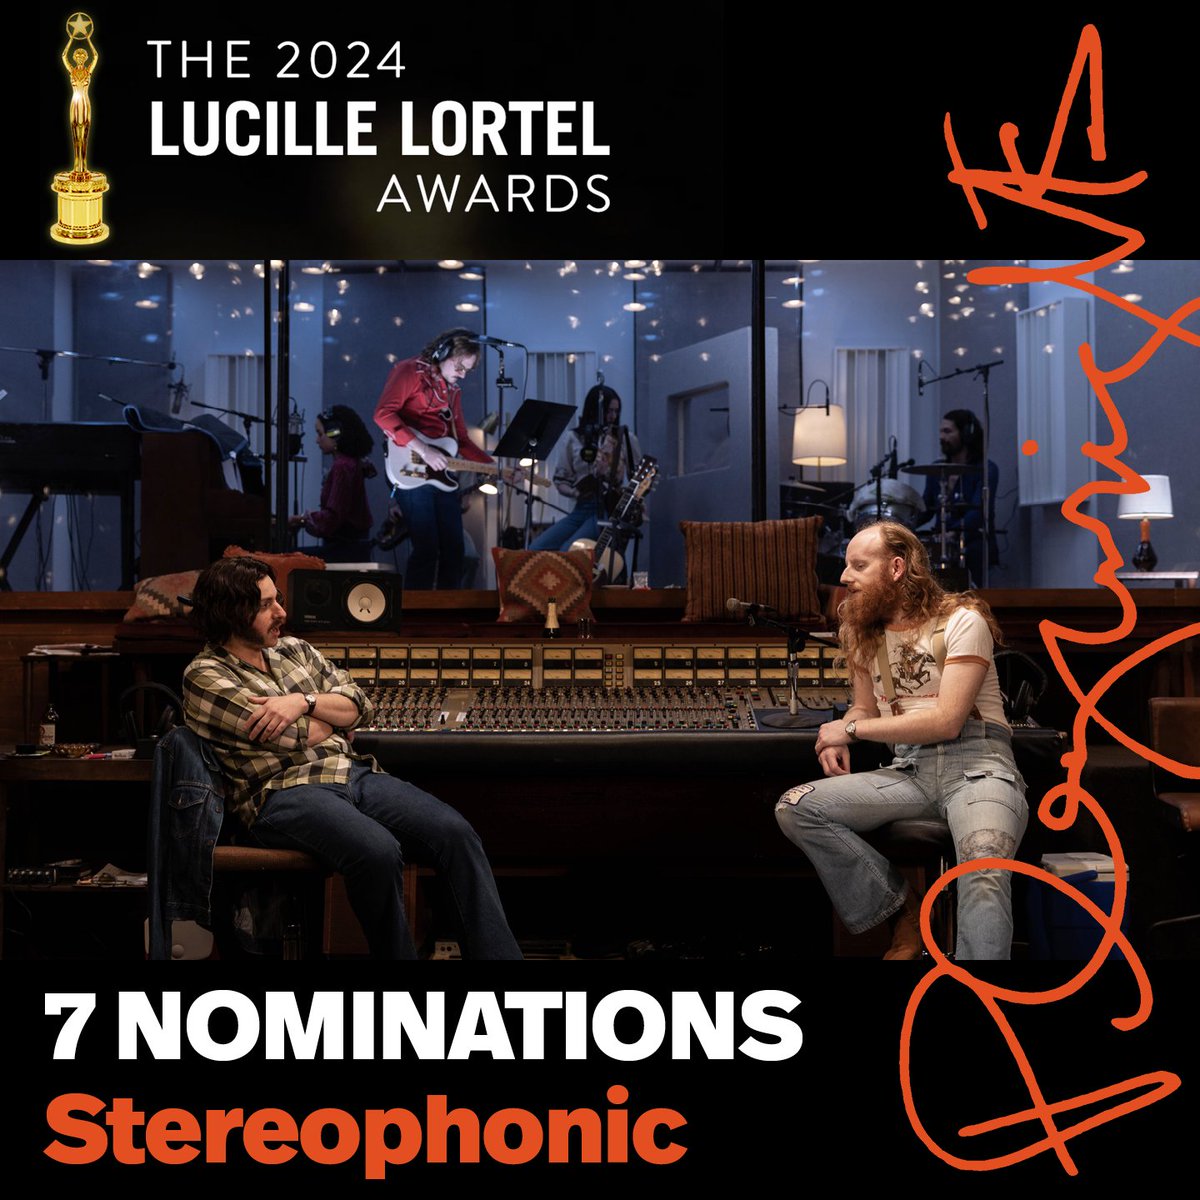 CONGRATS to 'Stereophonic' on its Lucille Lortel Award nominations! lortelaward.com/2024-nominees/